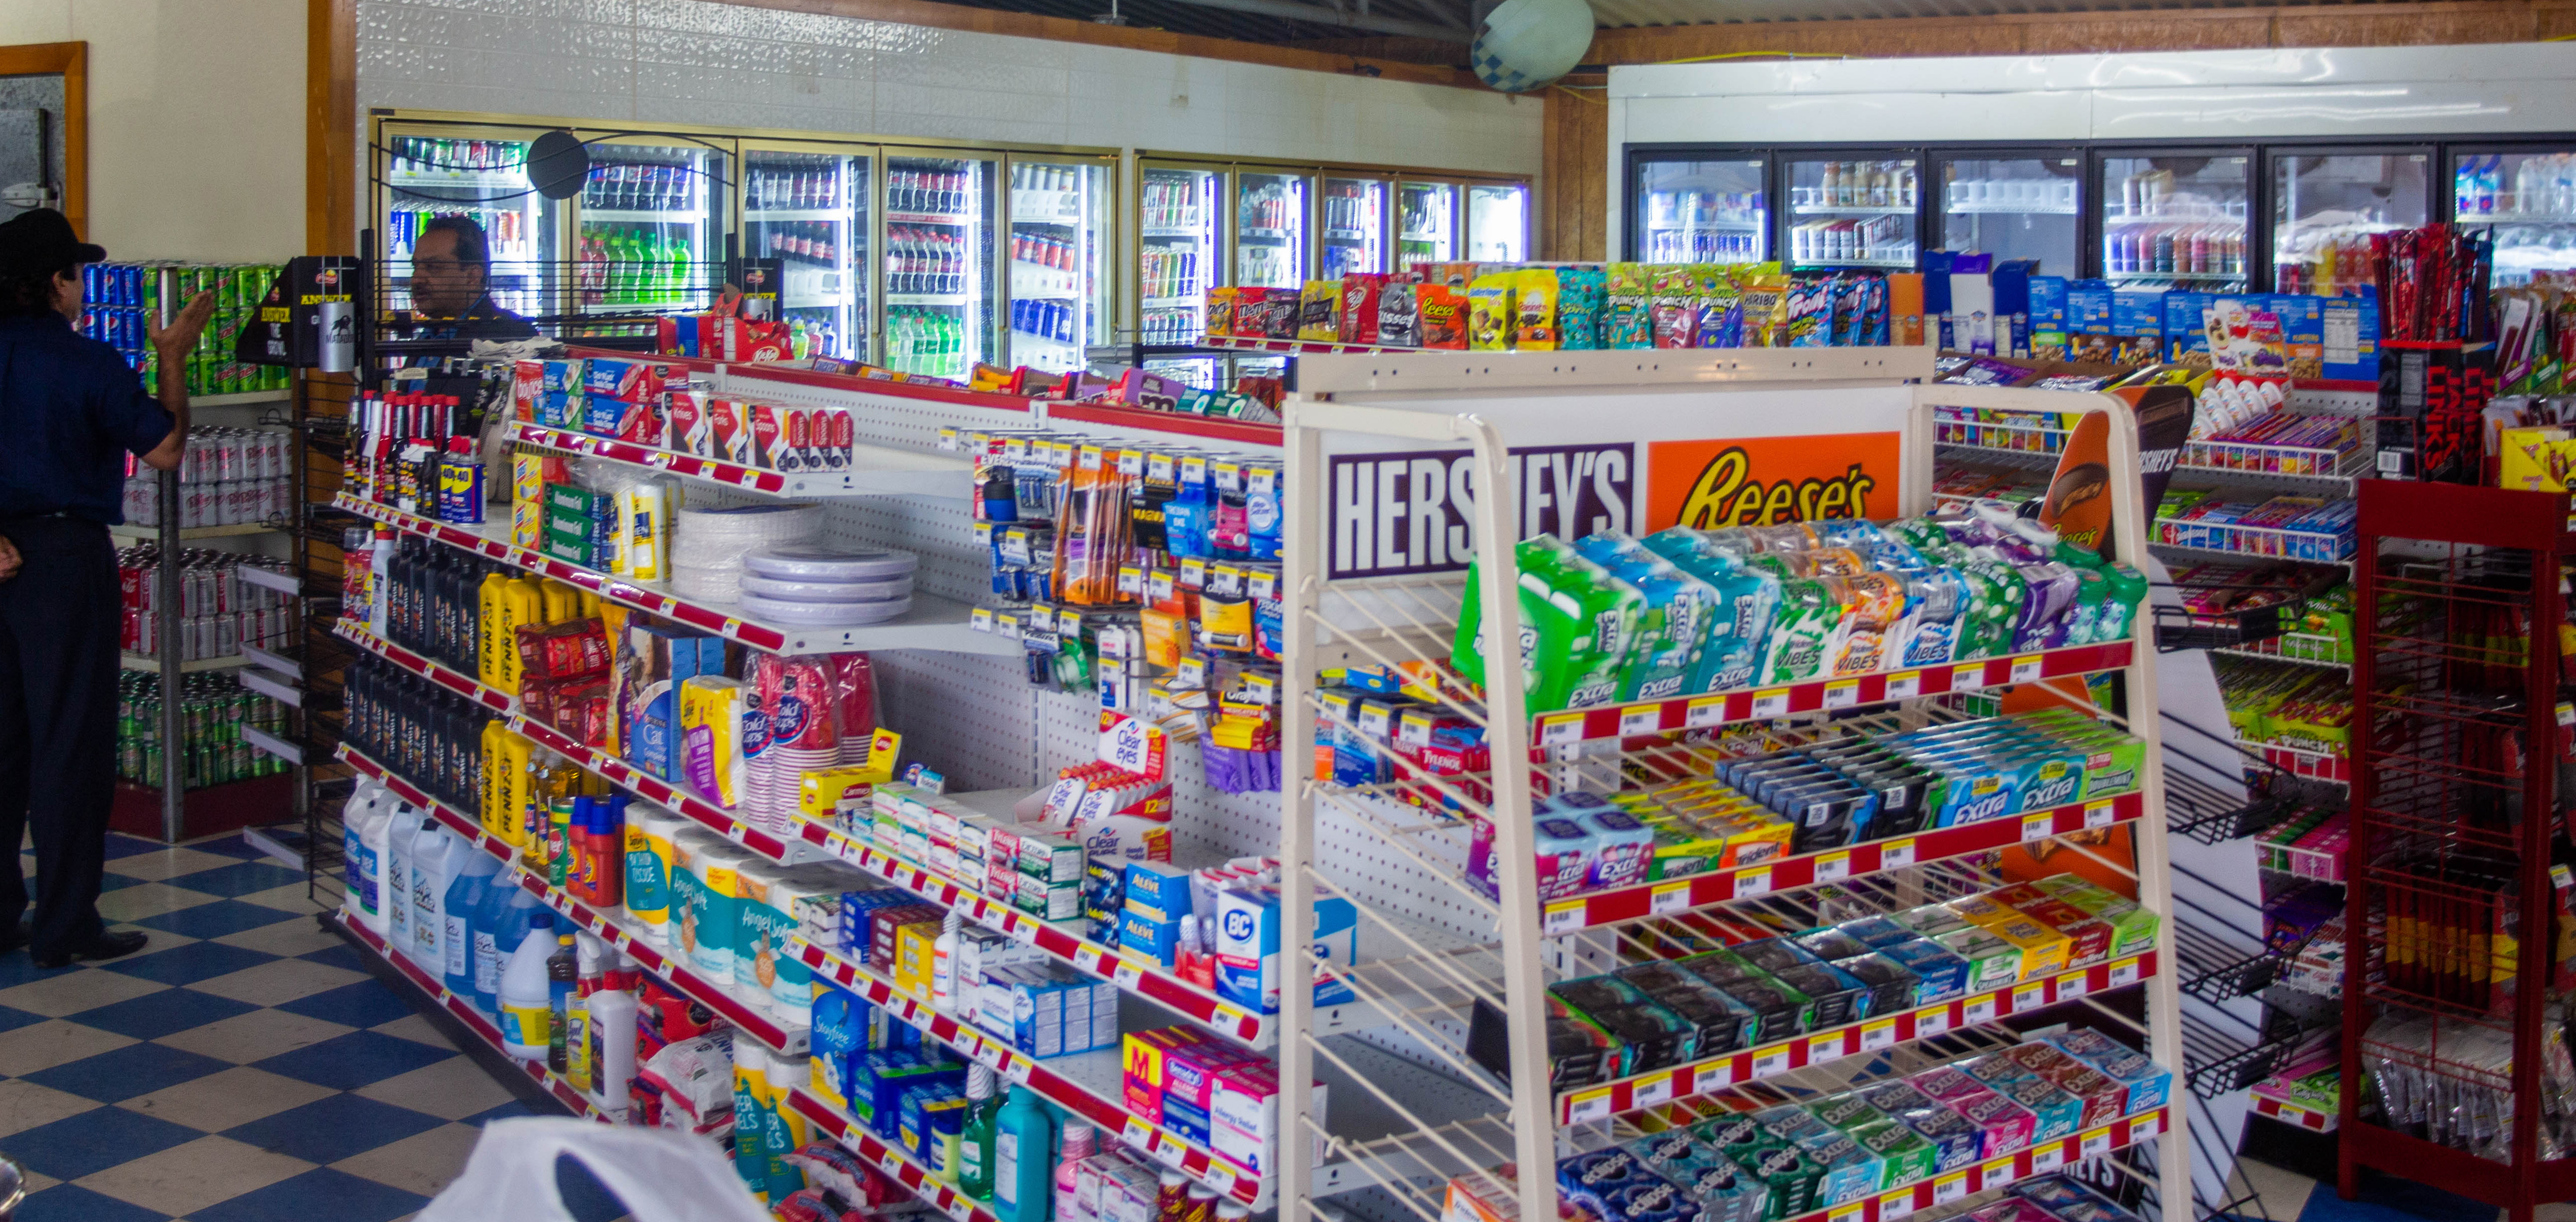 Shelves stand stocked with candy and snacks ready for purchase at the Cordell Plaza. PHOTO BY HECTOR LUCAS